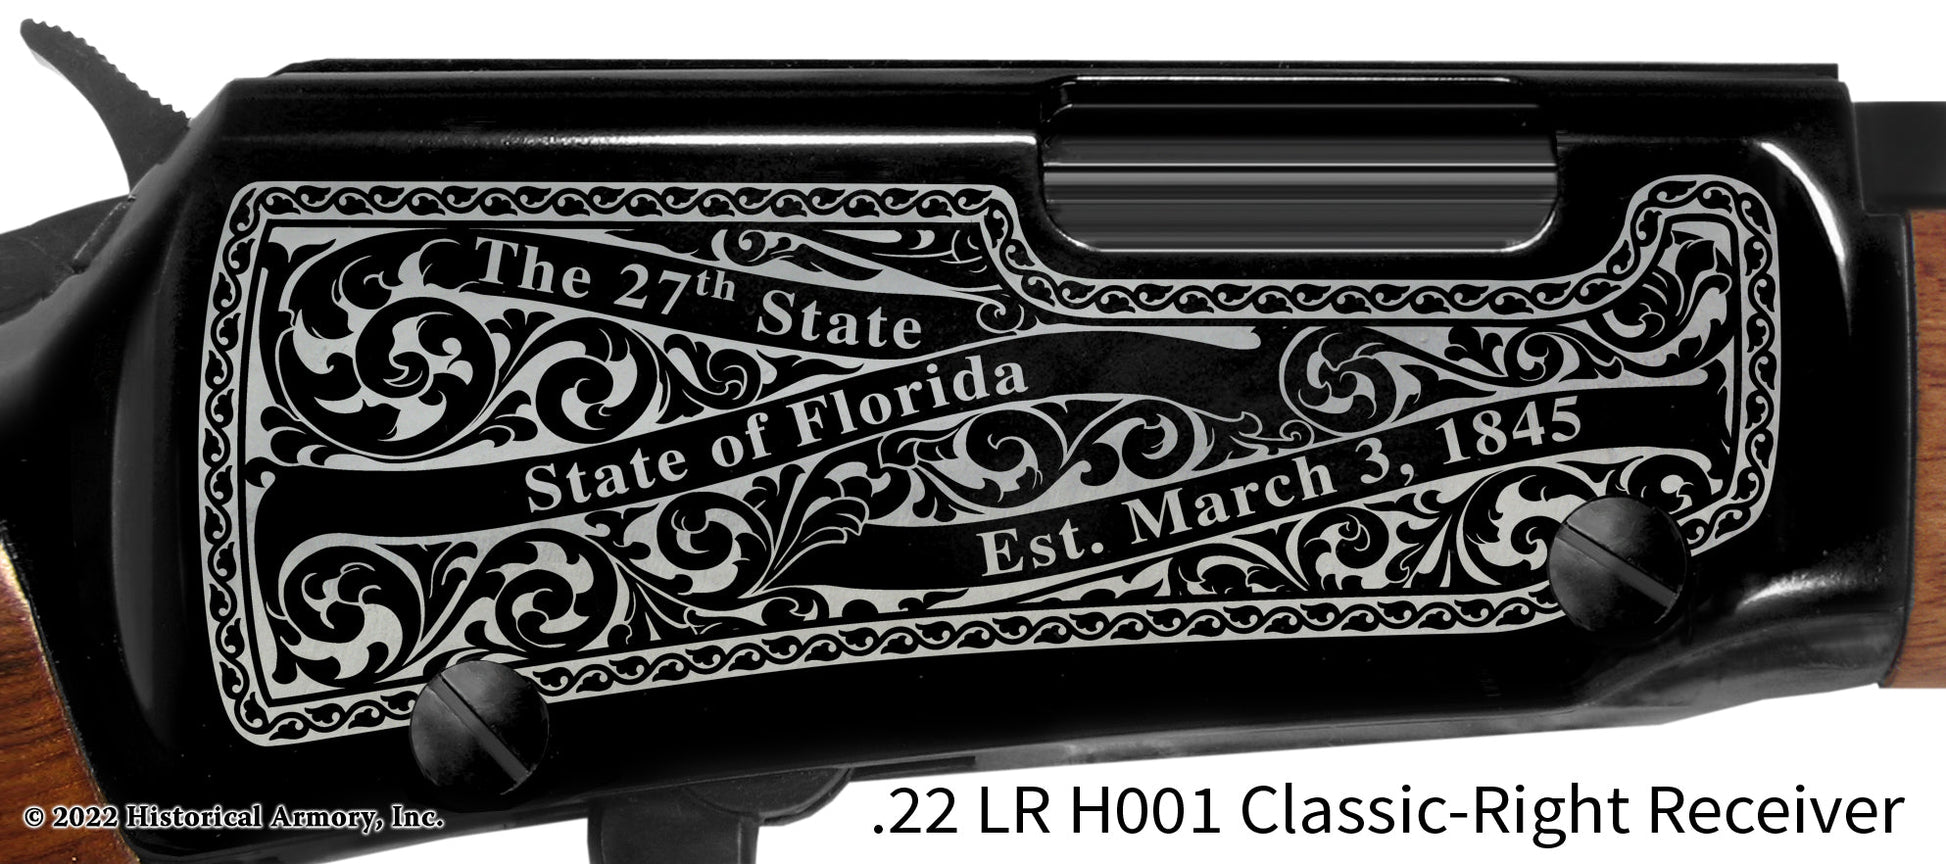 Hendry County Florida Engraved Henry H001 Rifle